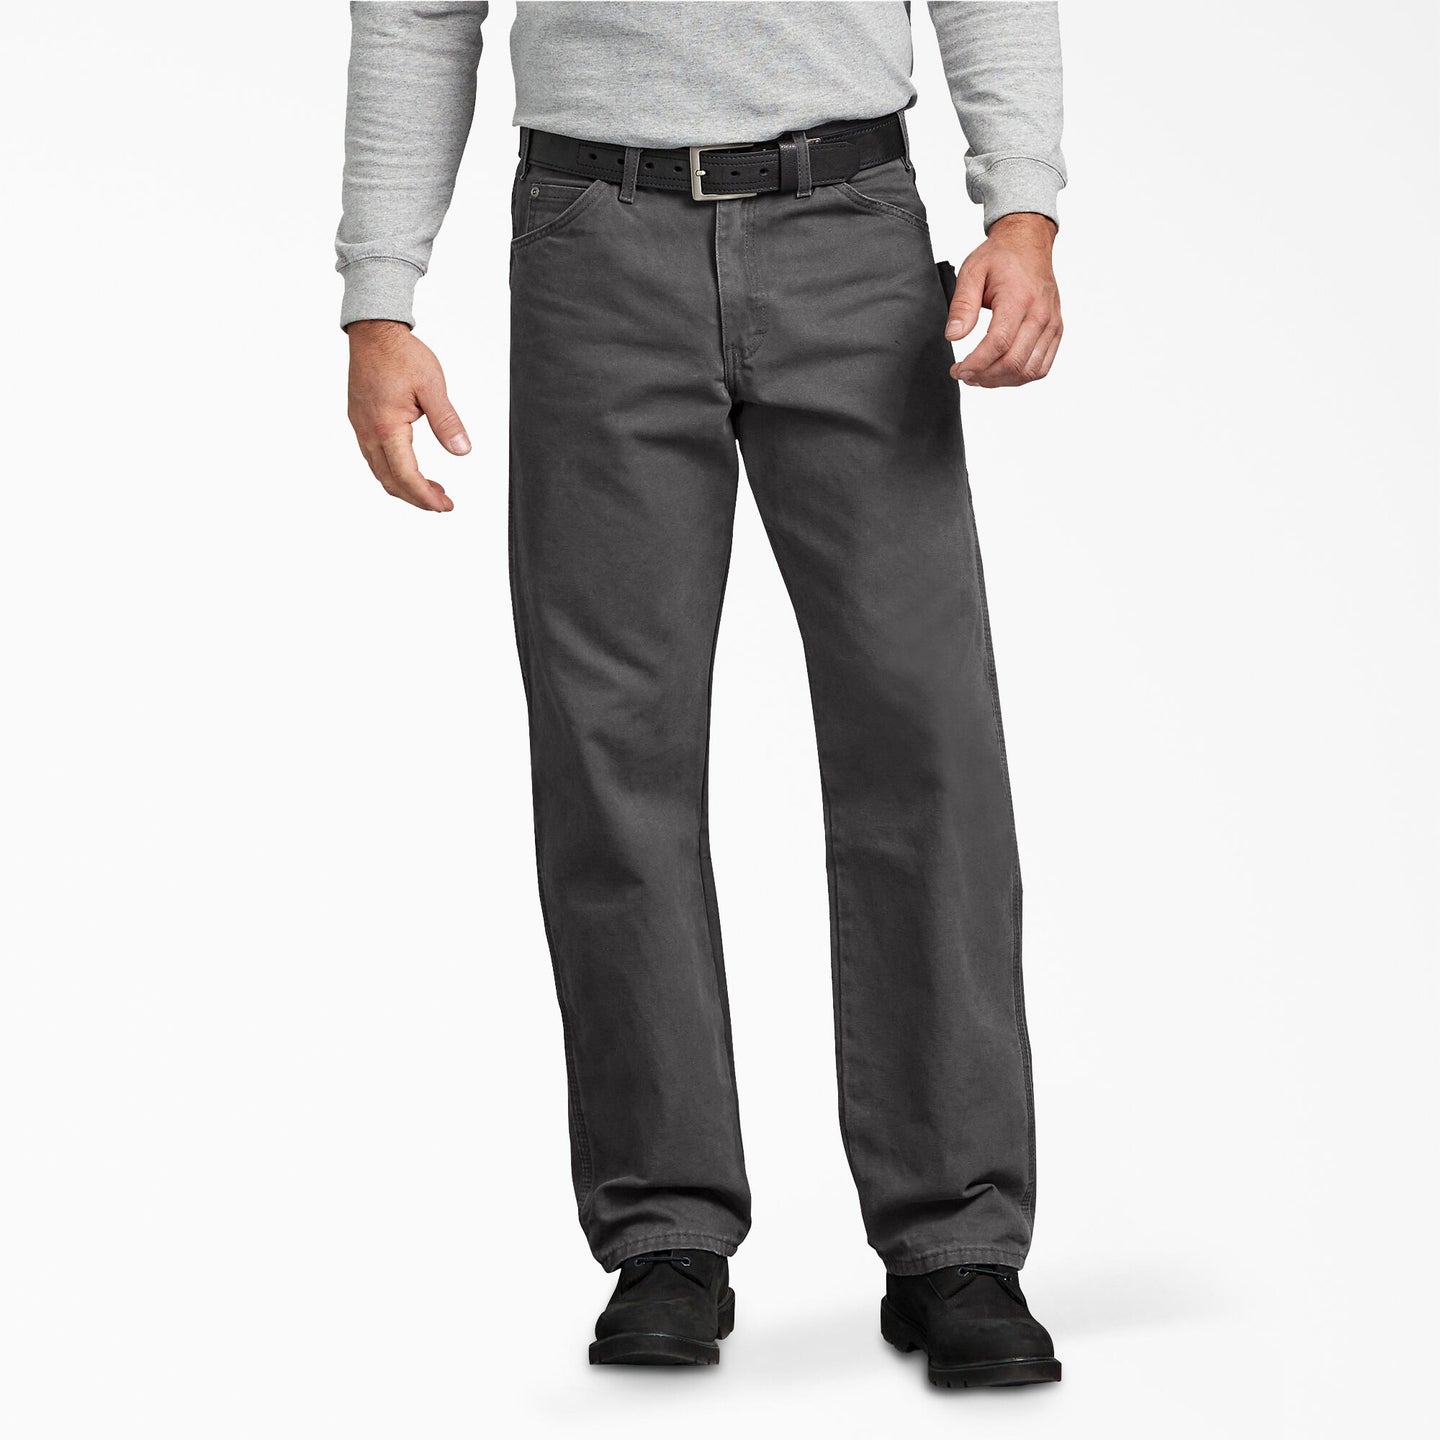 Relaxed Fit Straight Leg Sanded Duck Carpenter Pants